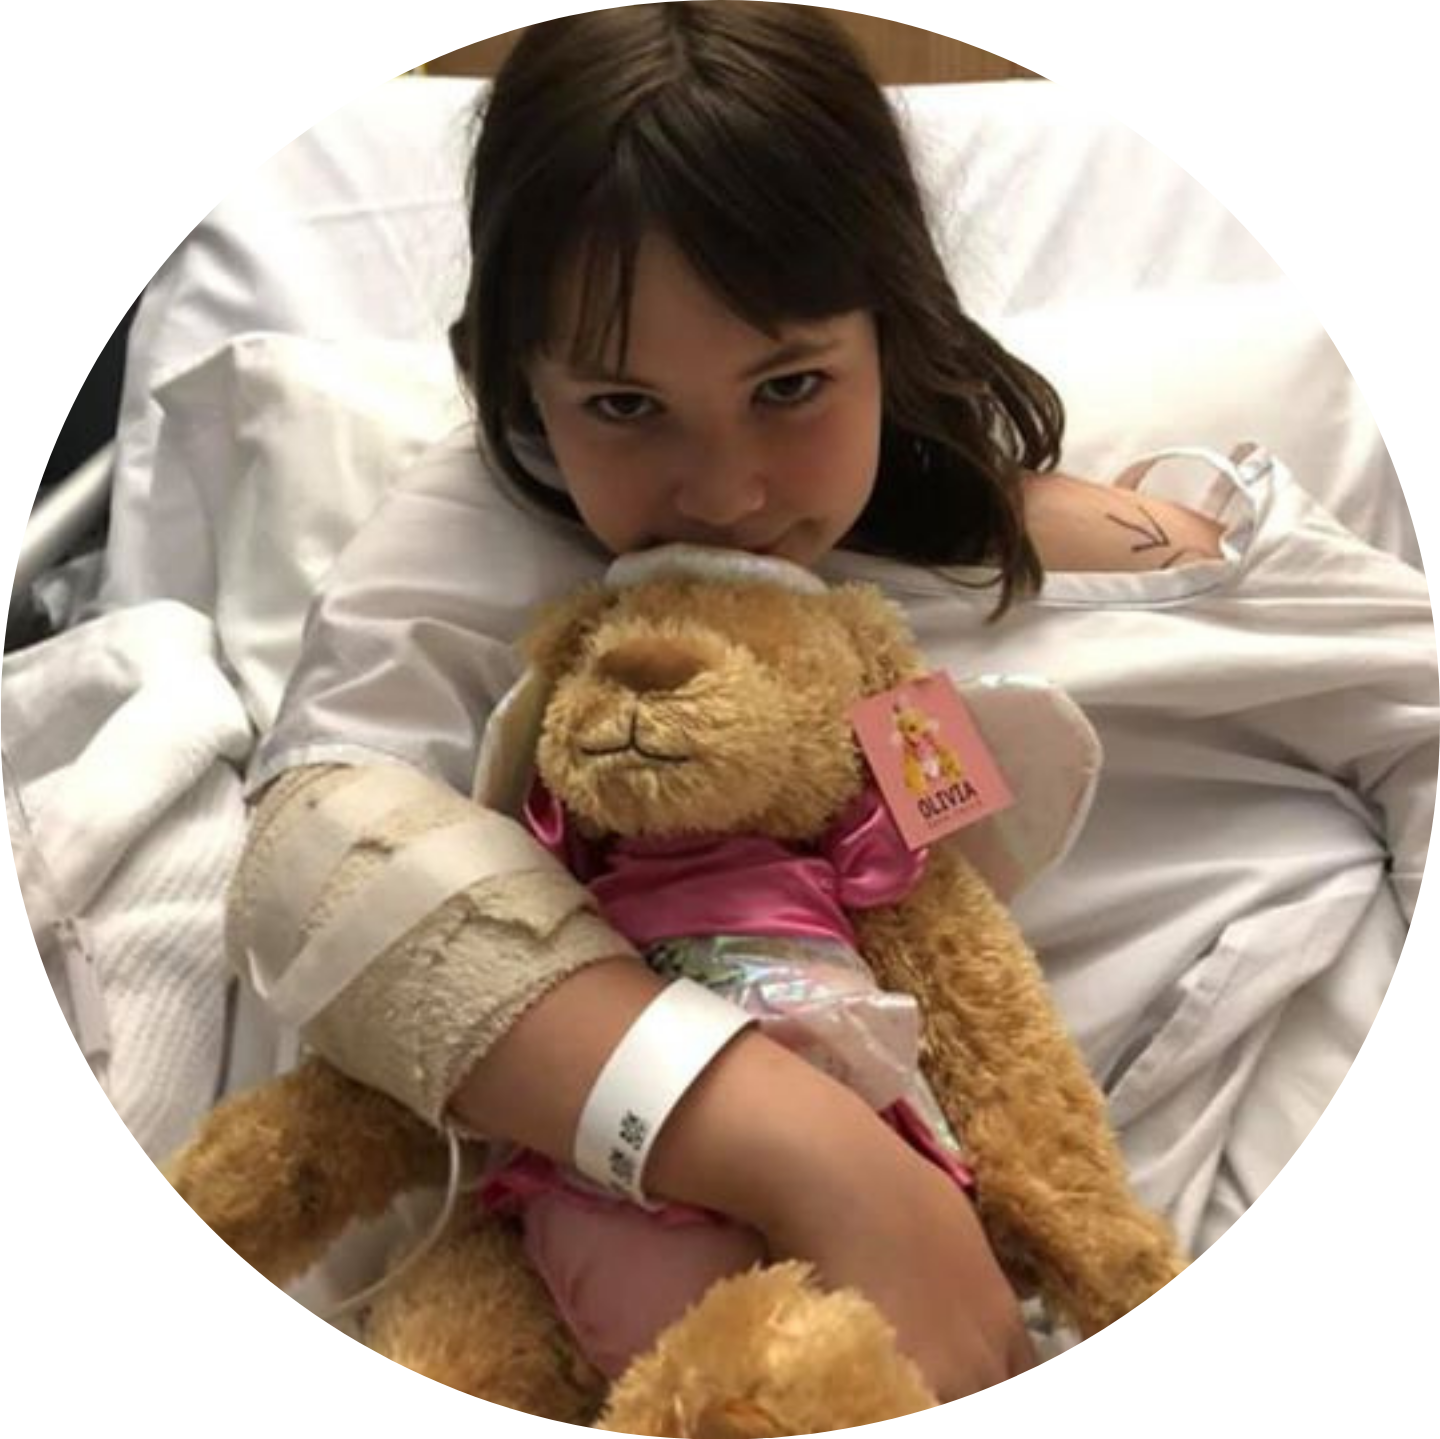 A little girl in a hospital bed is hugging a donated bear that is dressed in a pink angel costume.